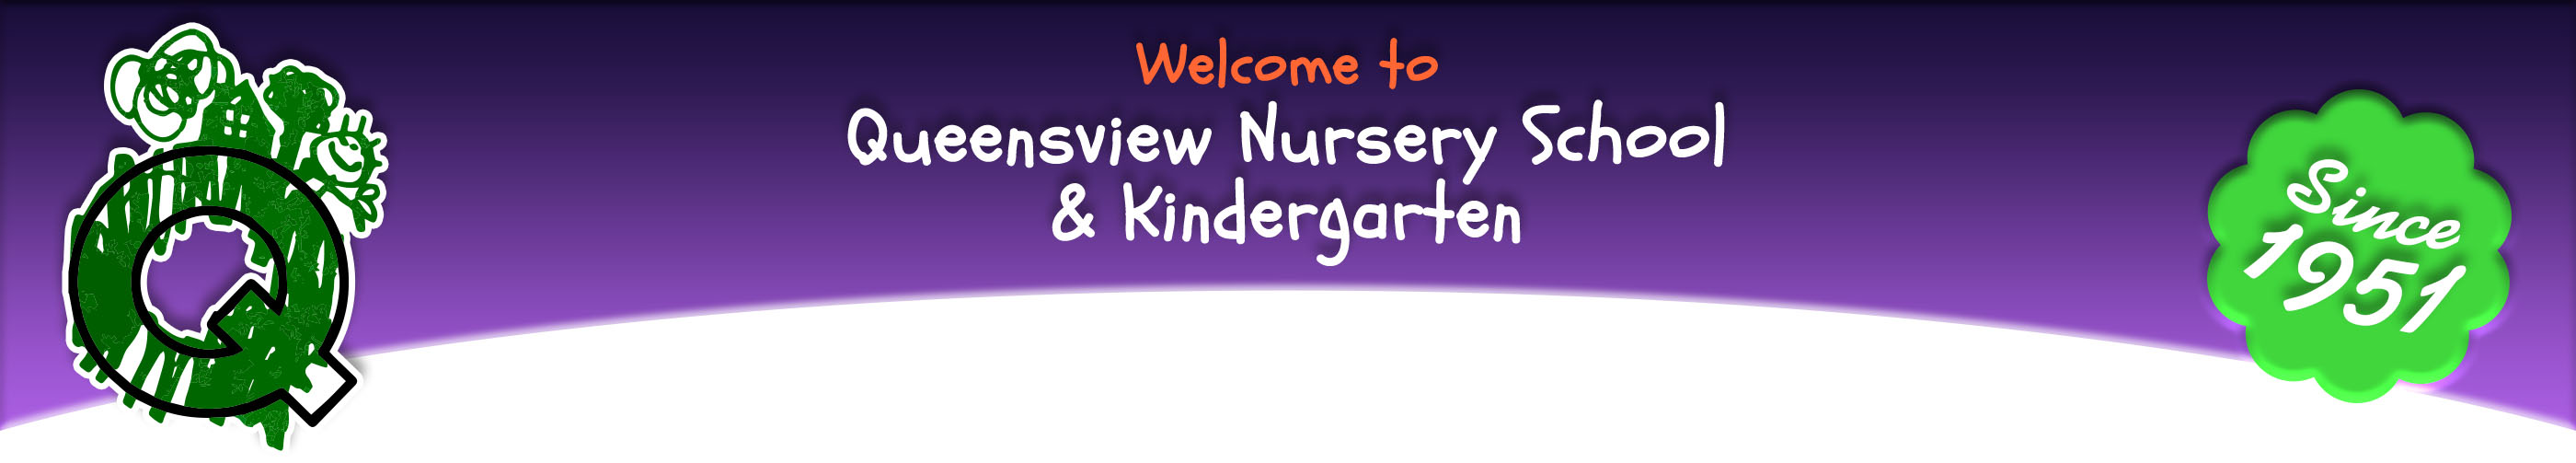 Queensview Nursery School and Kindergarten: Playing to Learn Since 1951